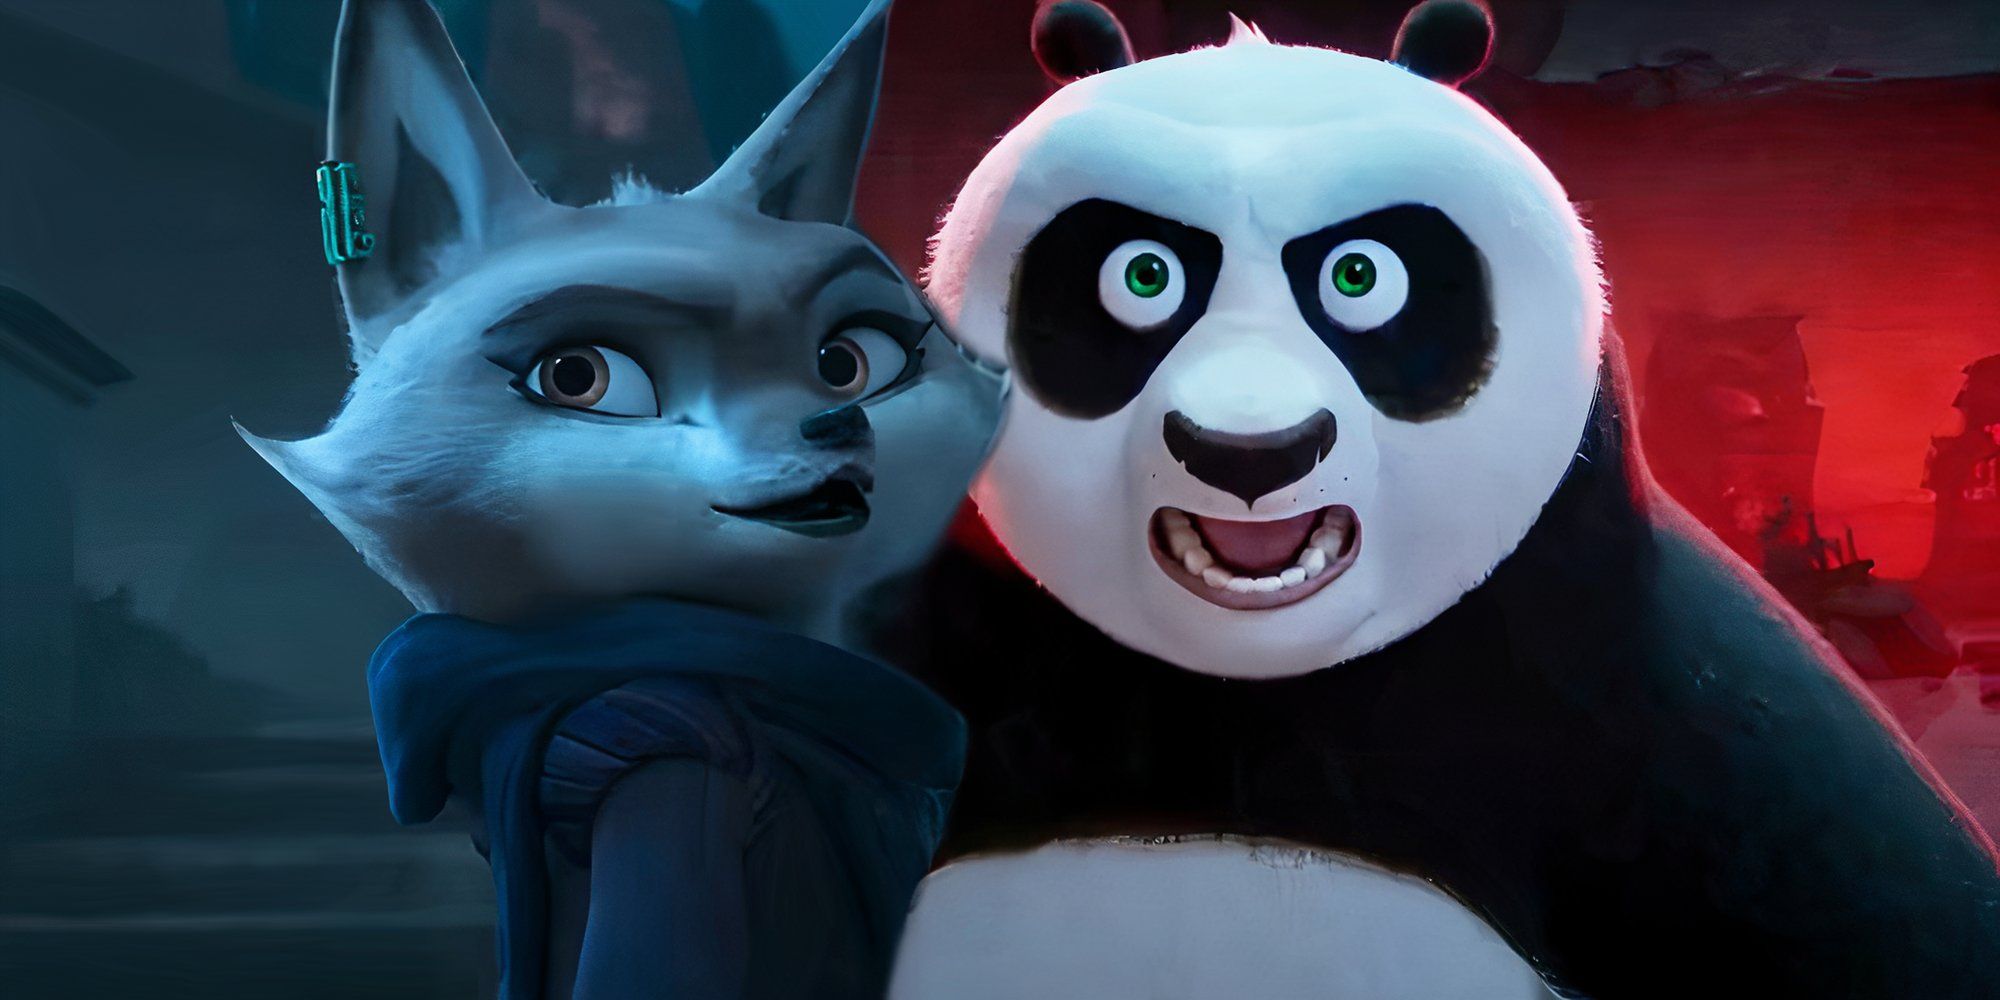 Zhen looking over her shoulder next to Po getting ready to fight in in the Kung Fu Panda 4